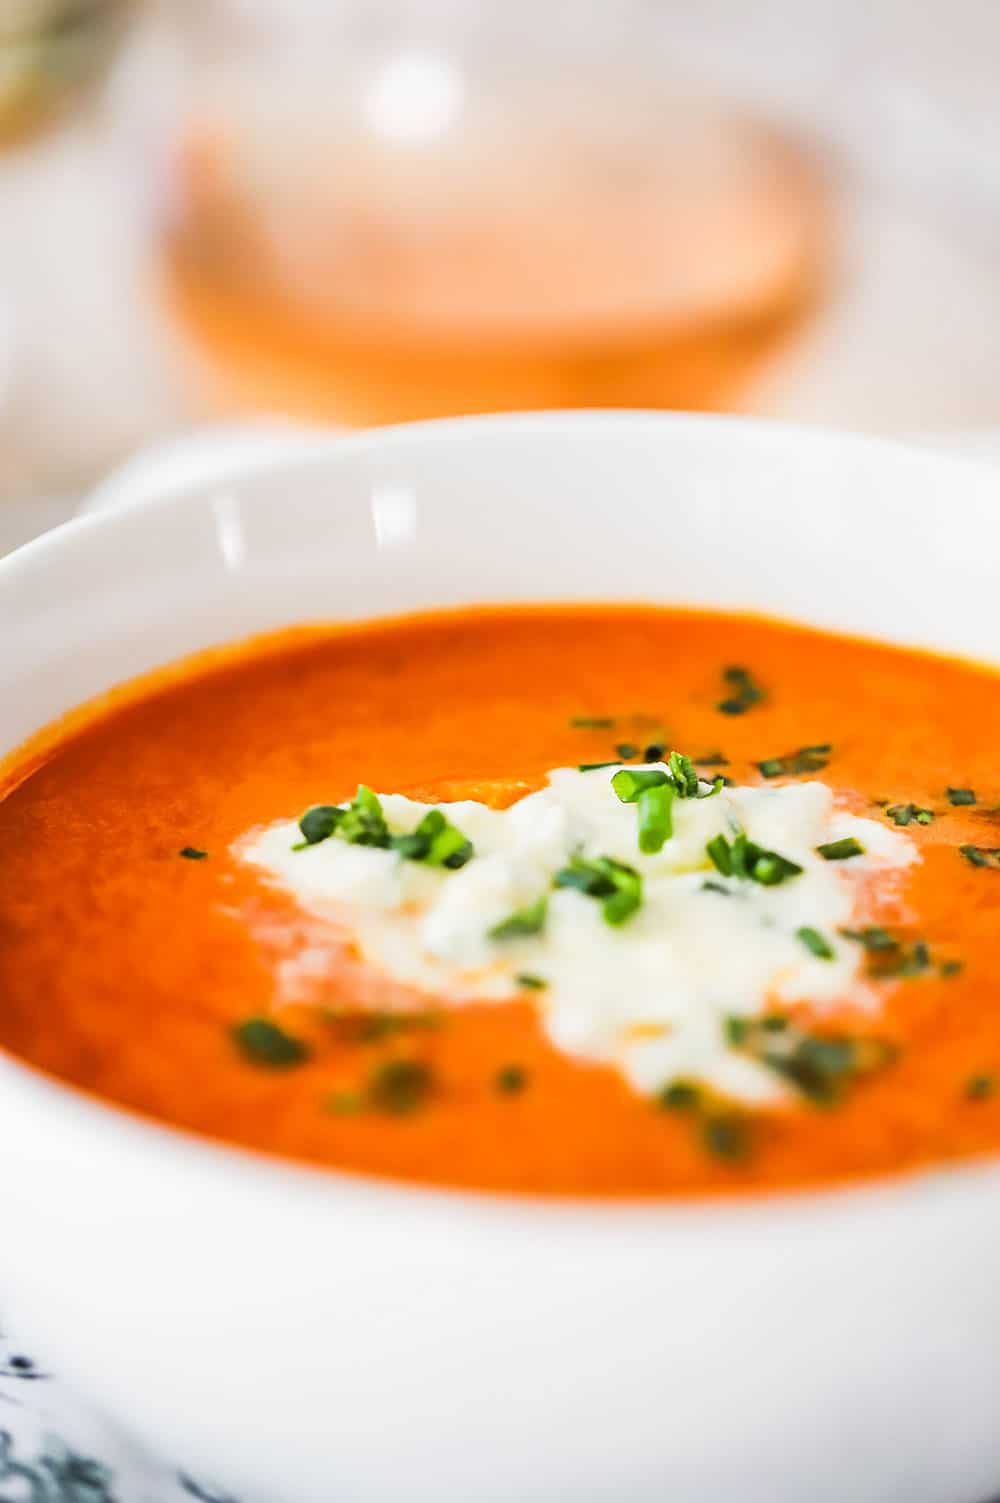 A close up view of a white bowl filled with carrot ginger soup topped with an herbed mousse.